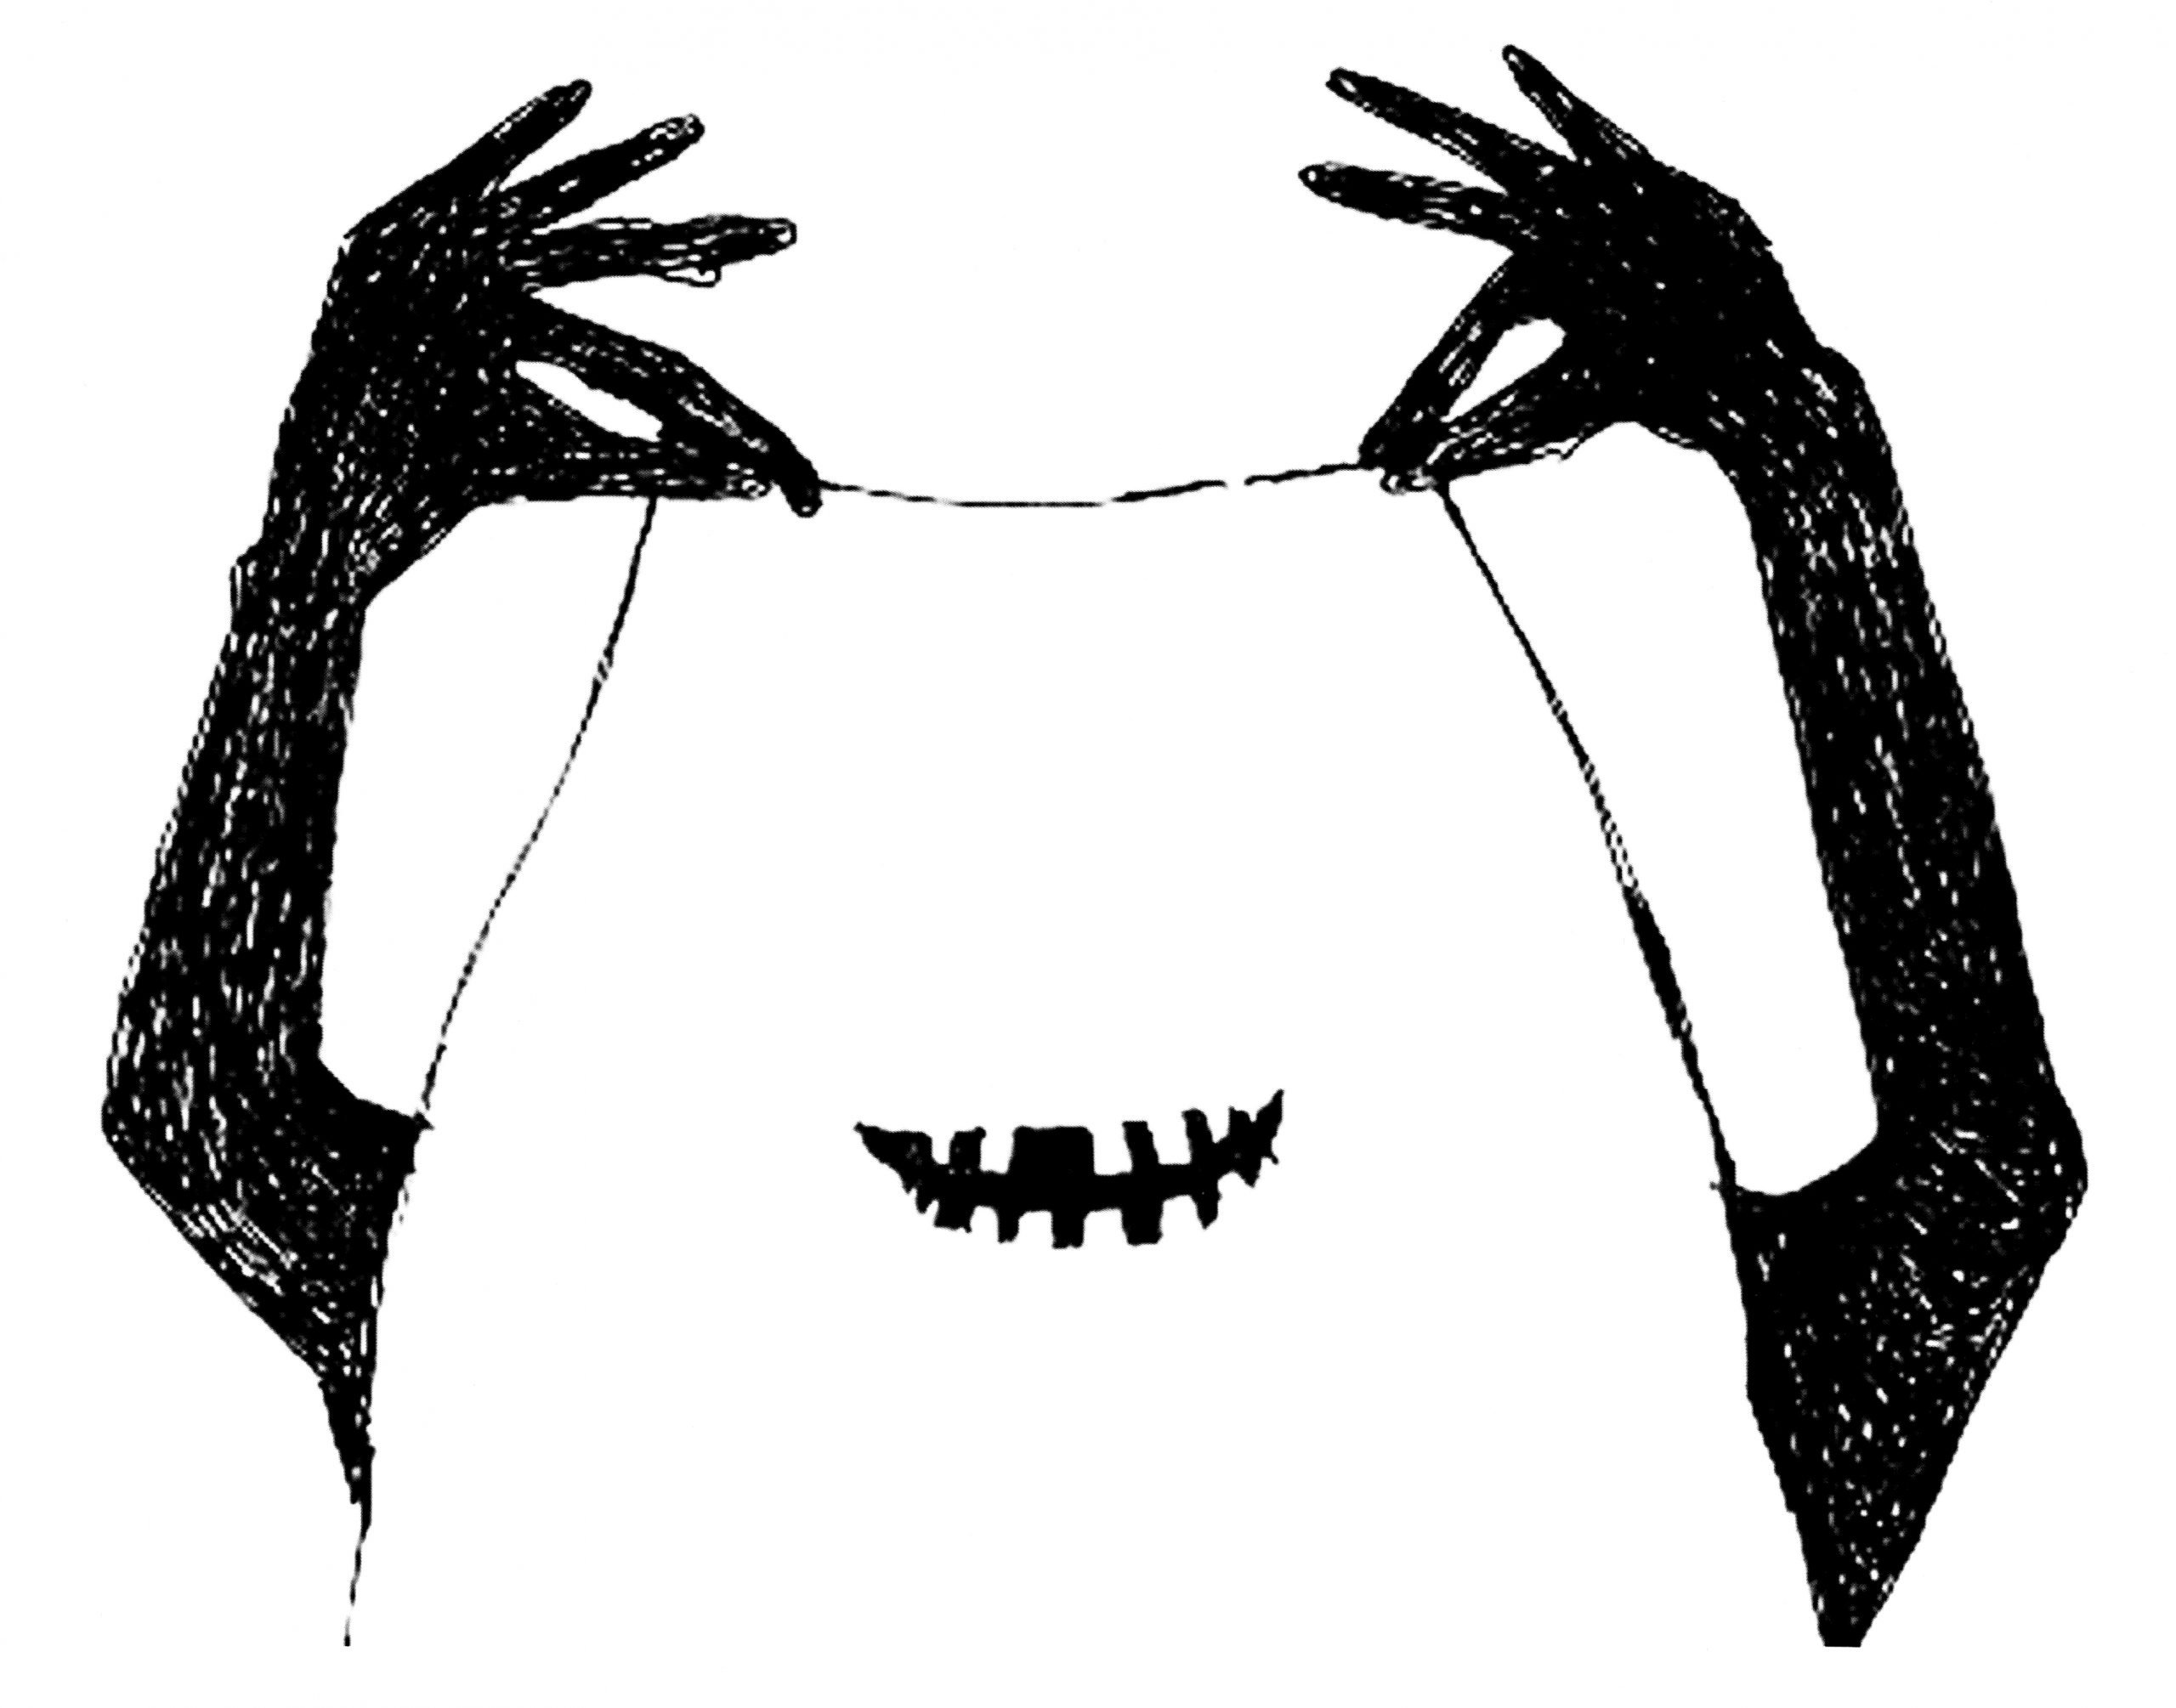  two black hands hold a white sheet over their body through the sheet, an eerie toothy smile emerges